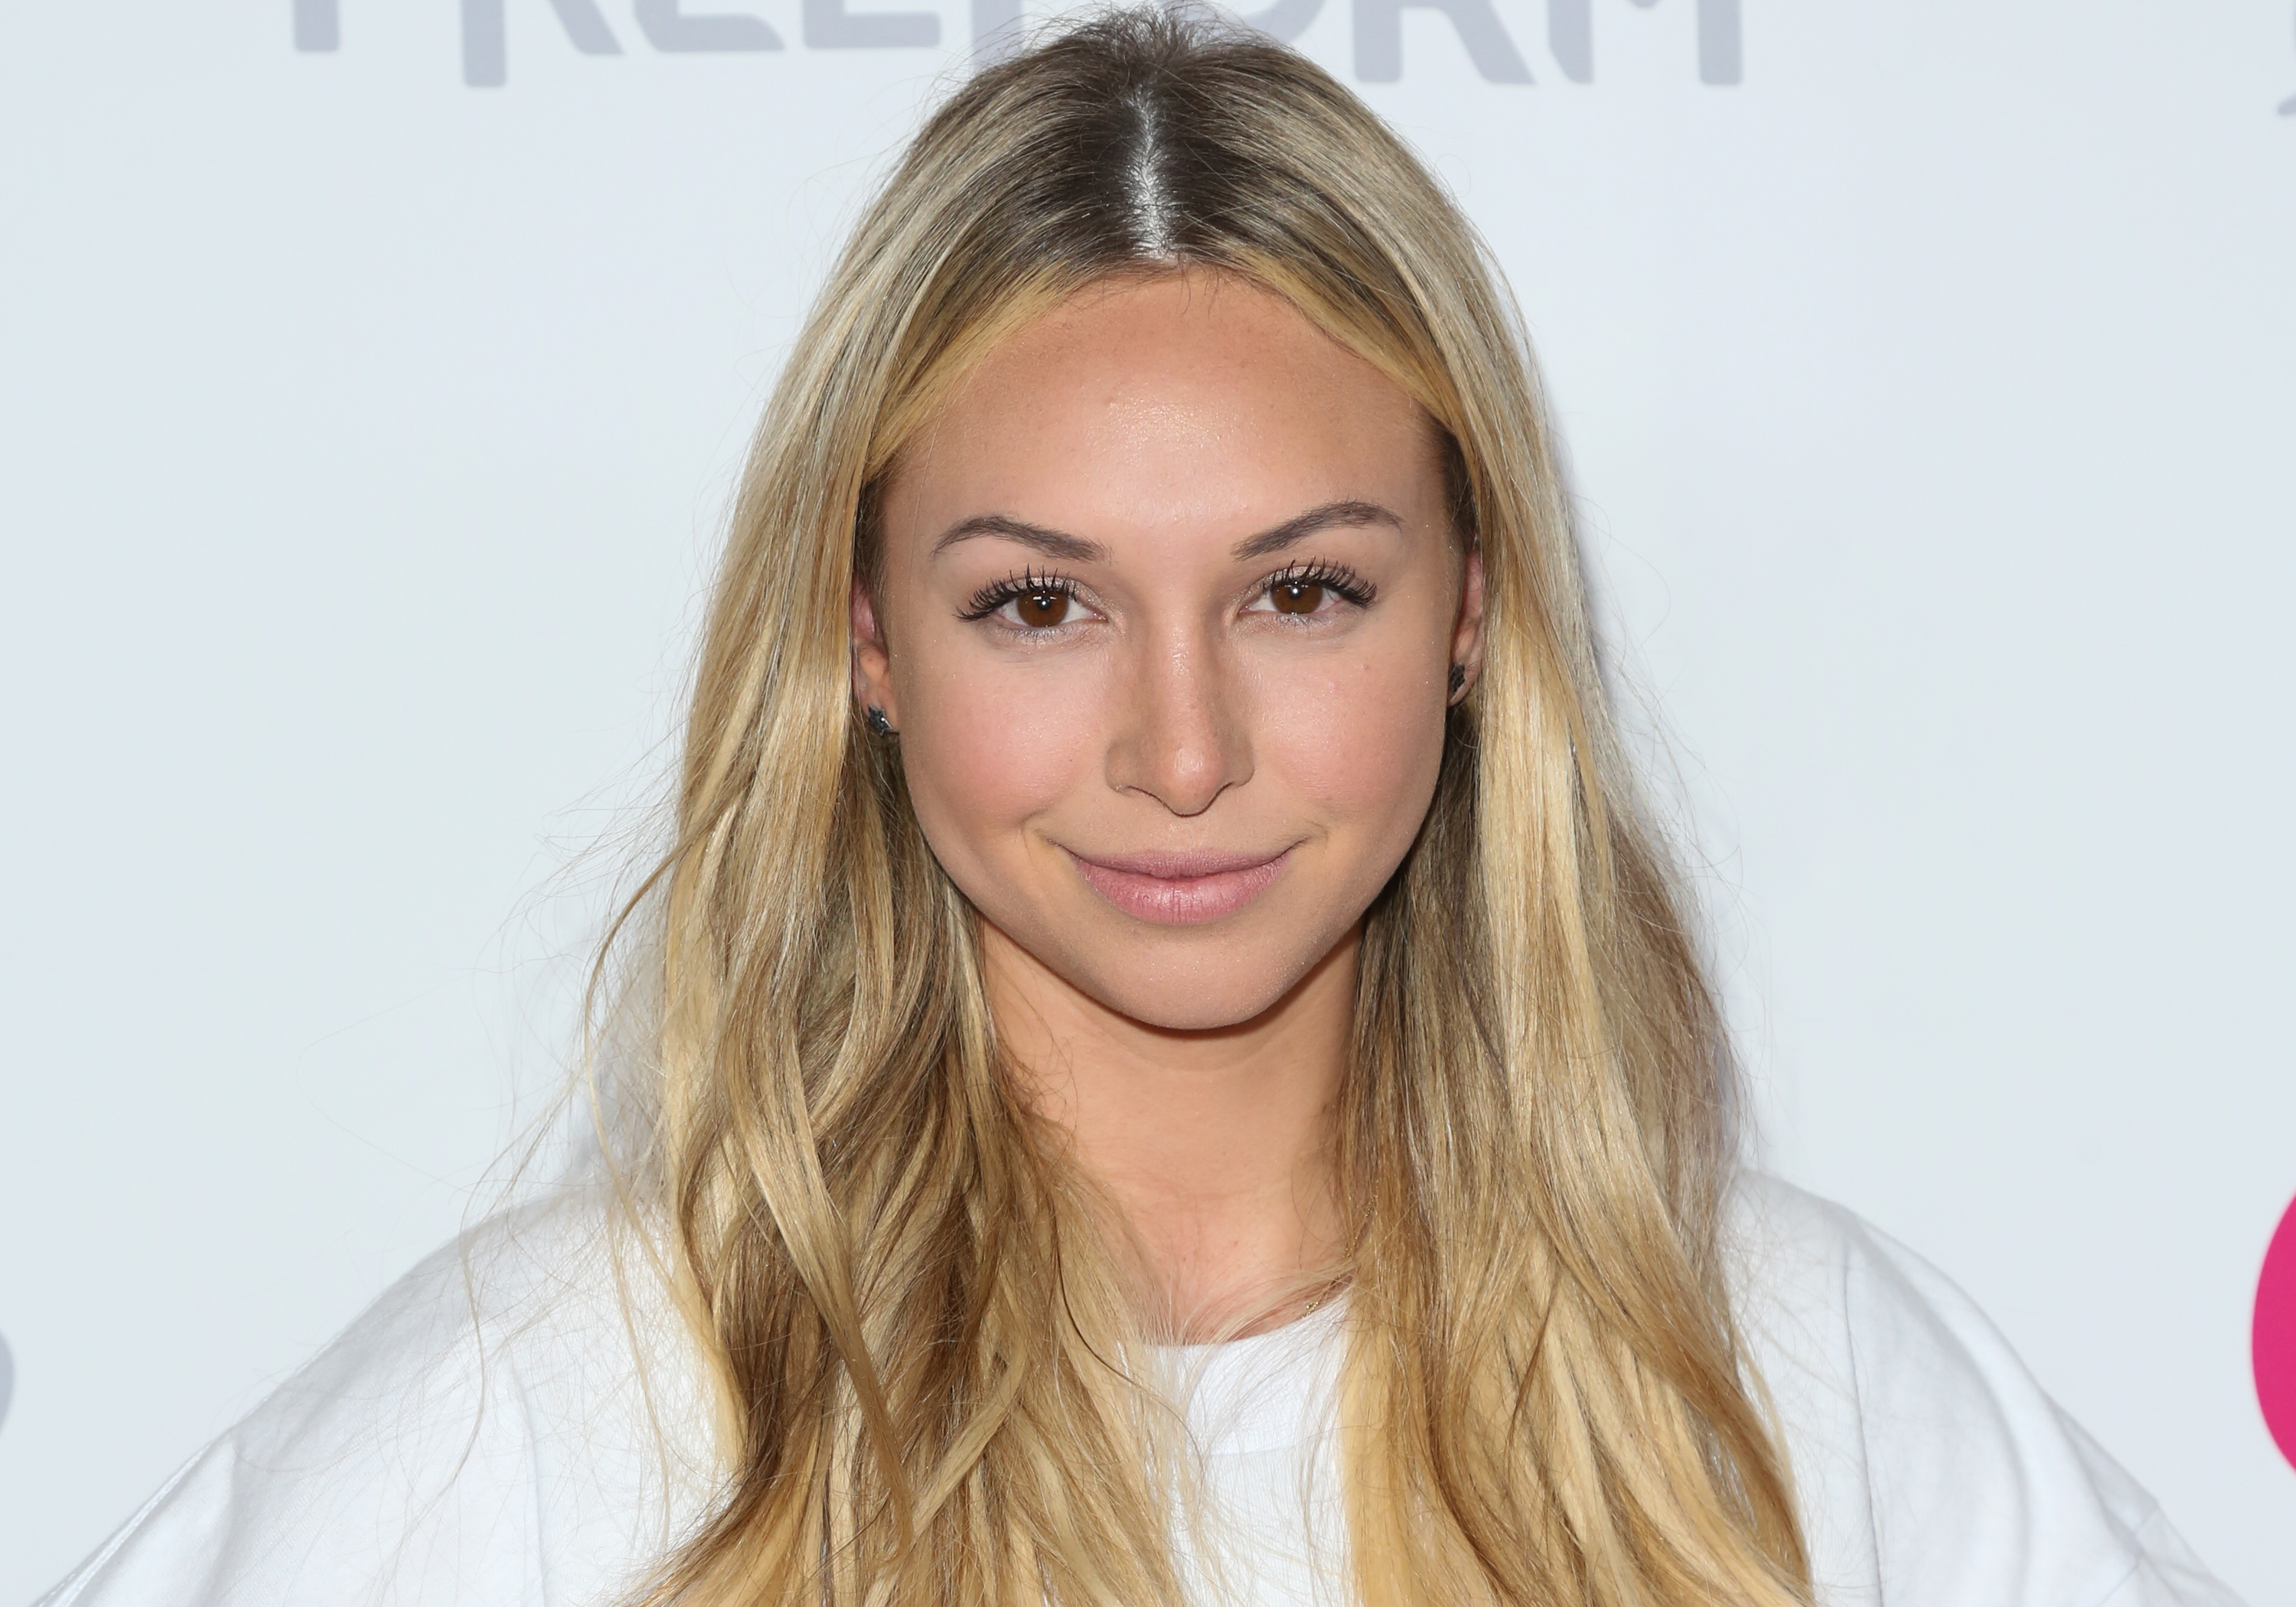 Reality TV Personality Corinne Olympios attends OK! Magazine's Summer kick-off party at The W Hollywood on May 17, 2017 in Hollywood, Calif. (Paul Archuleta&mdash;FilmMagic/Getty Images)